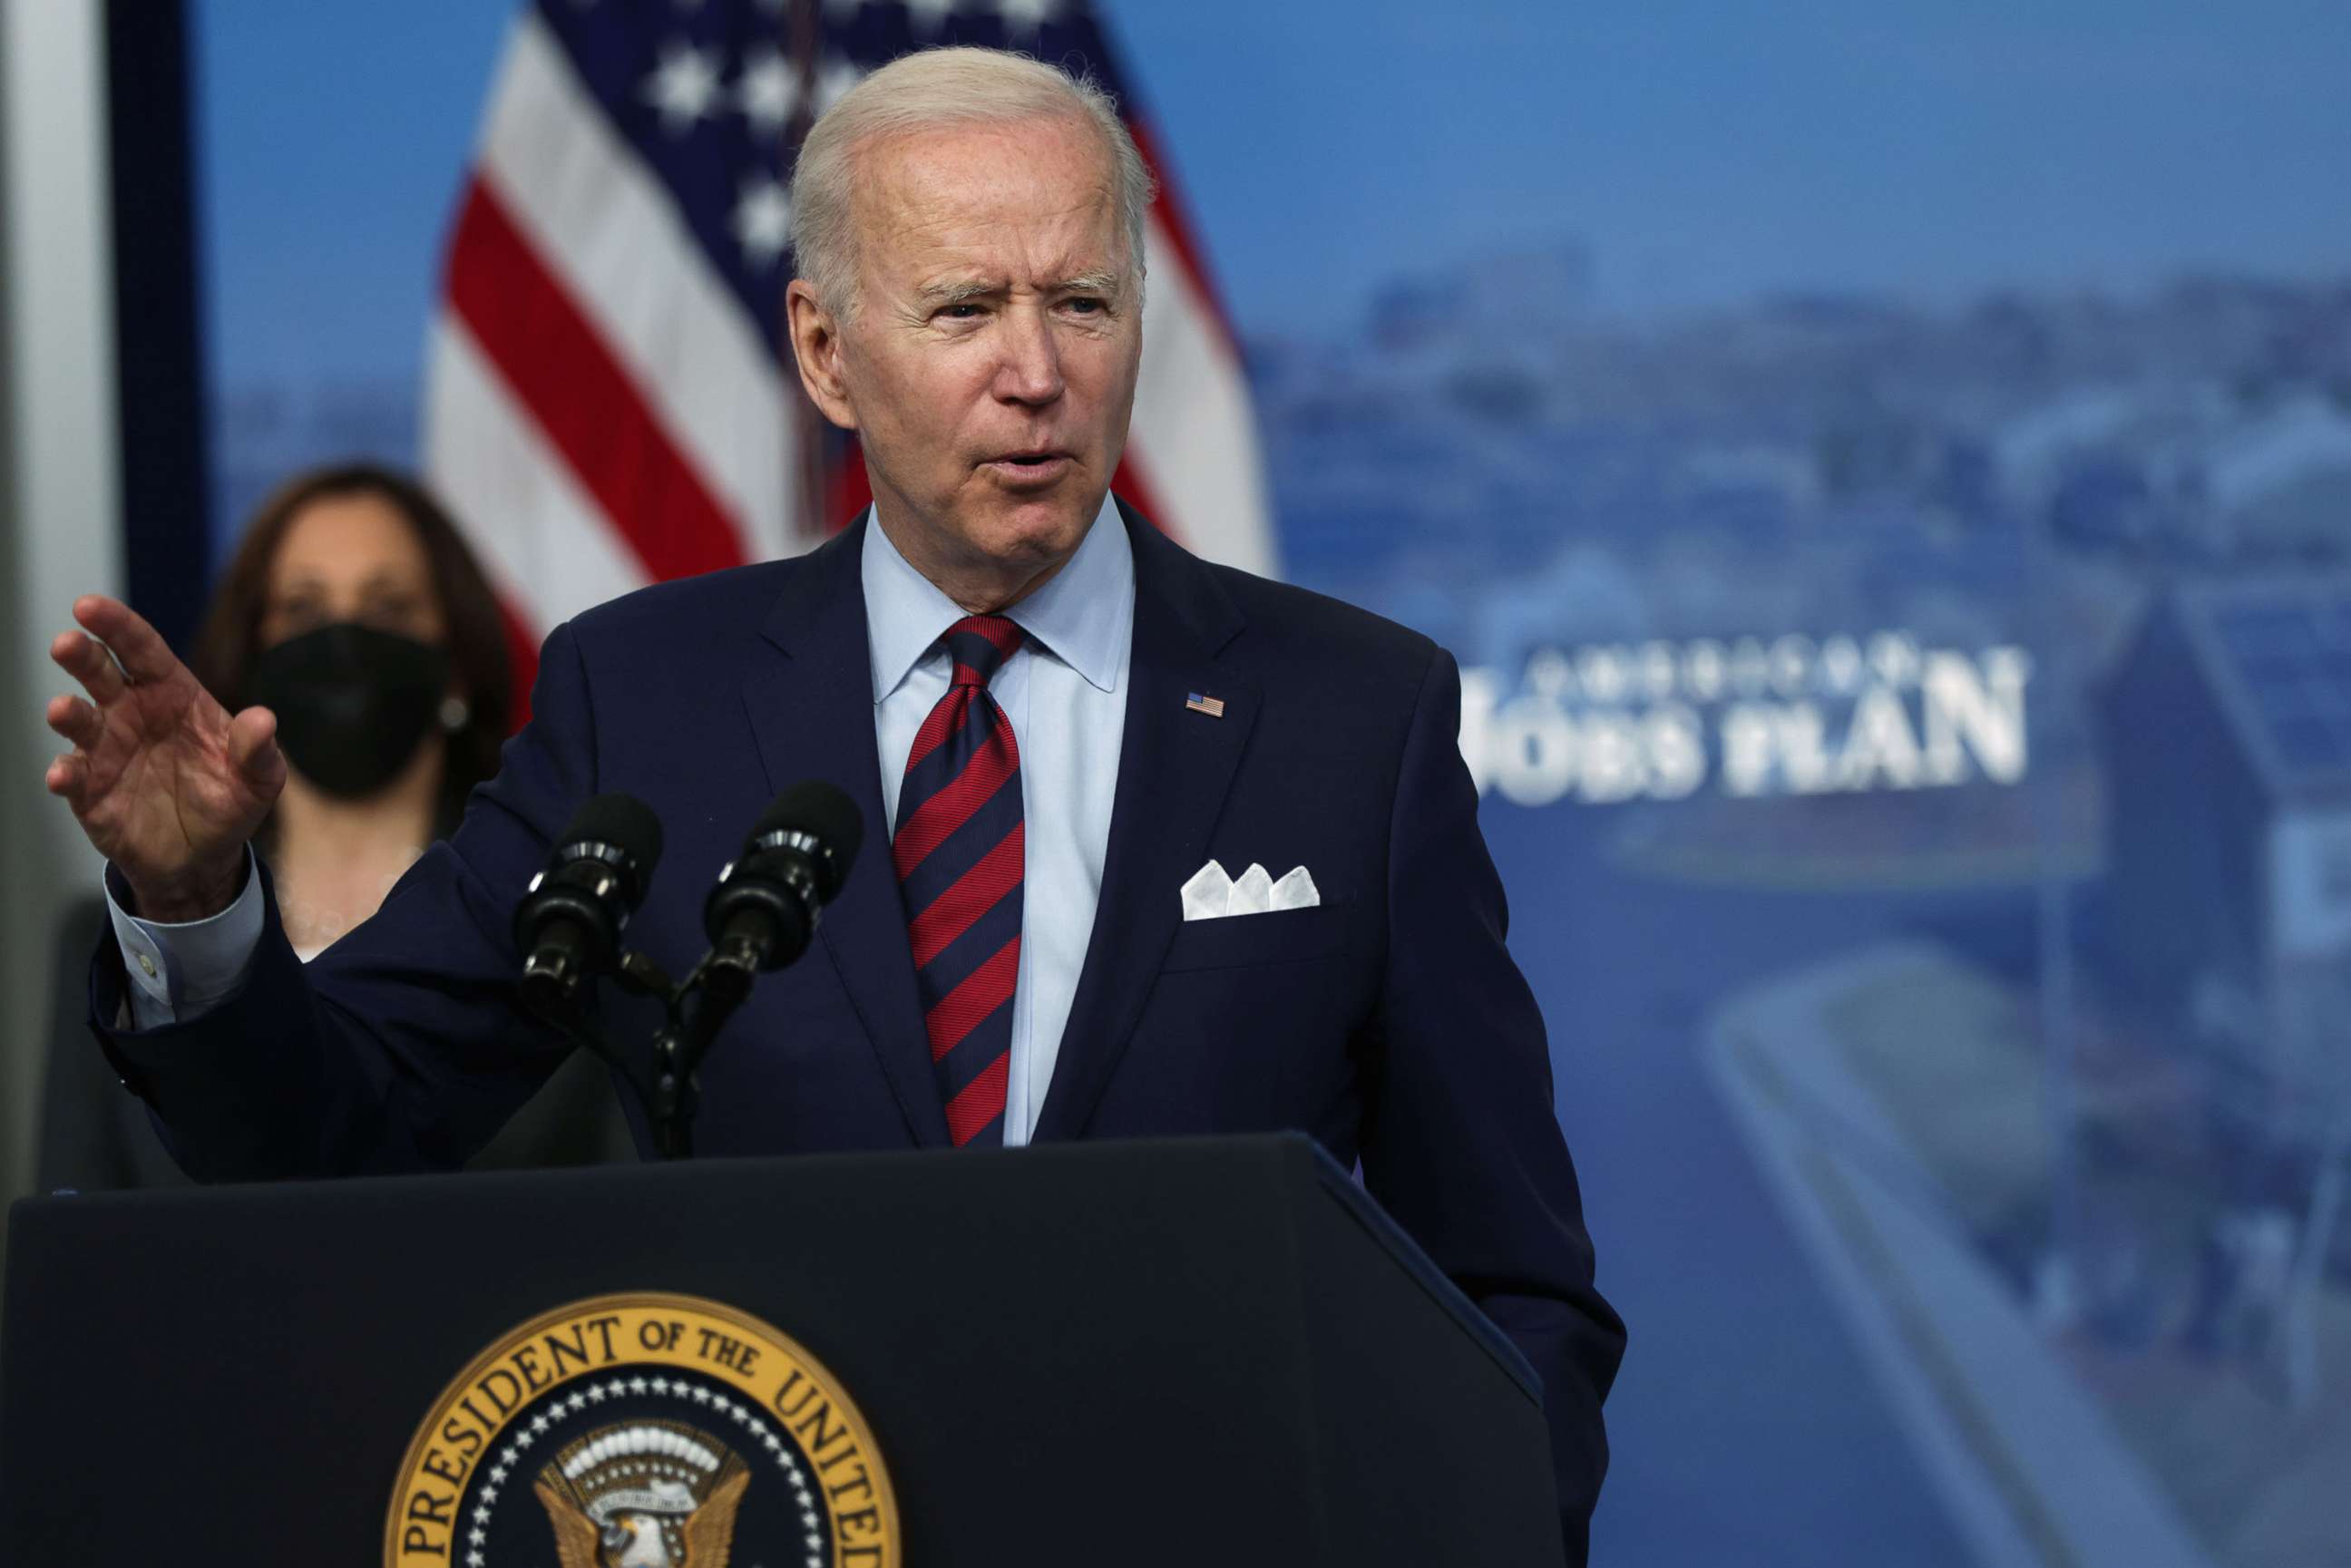 PHOTO: President Joe Biden speaks as Vice President Kamala Harris listens during an event at the South Court Auditorium at Eisenhower Executive Office Building, April 7, 2021, in Washington, D.C.